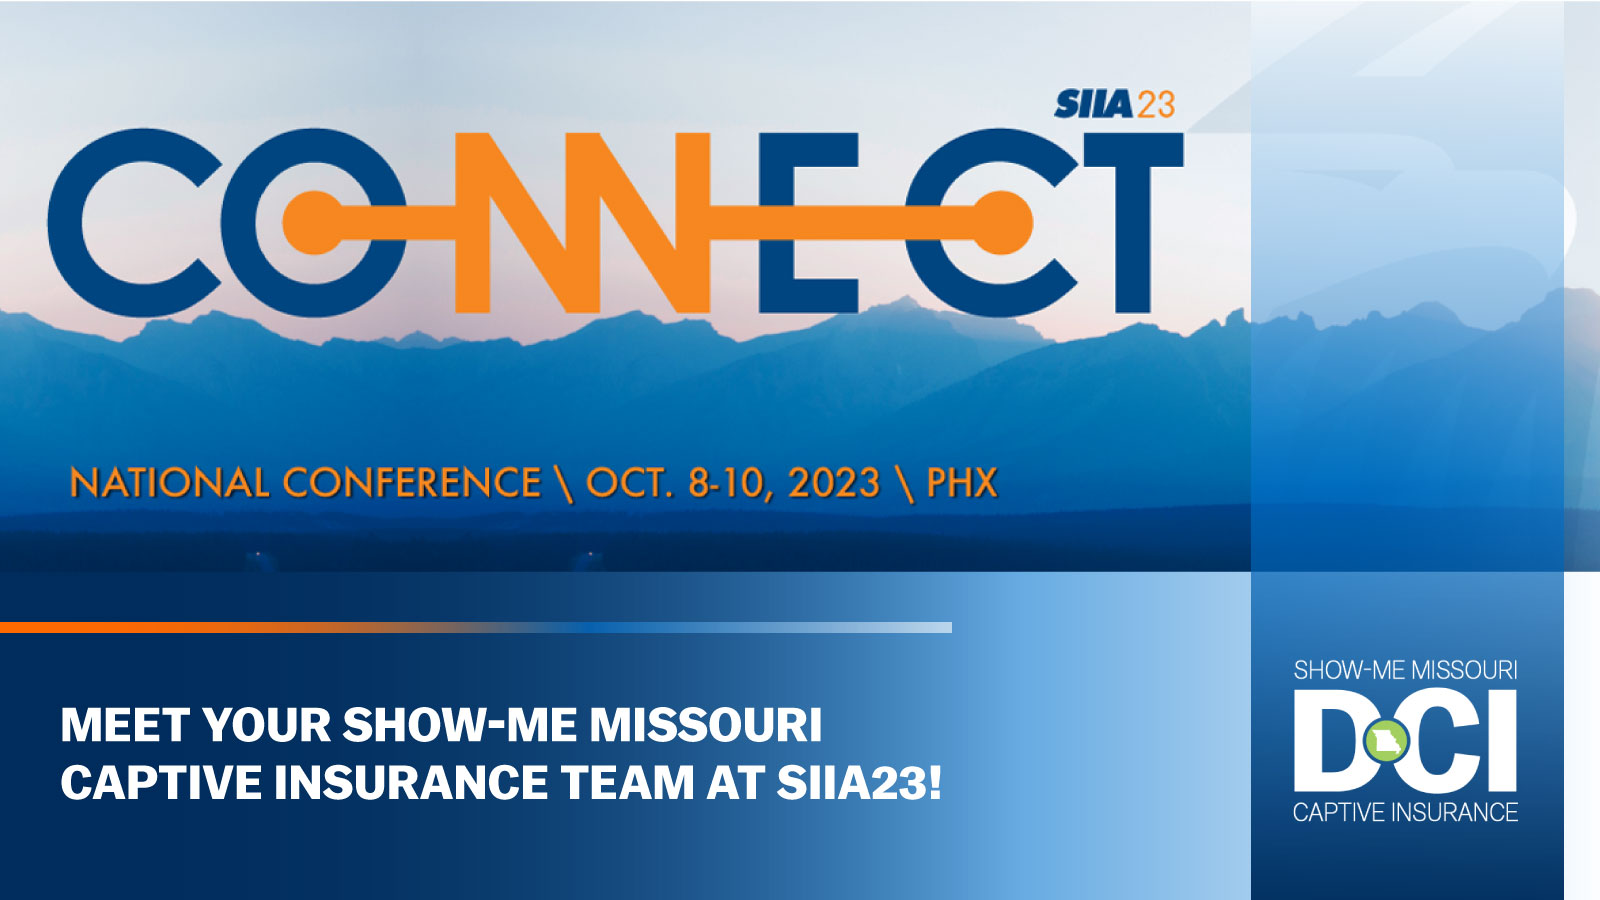 Connect SIIA23 National conference Oct 8-10, 2023